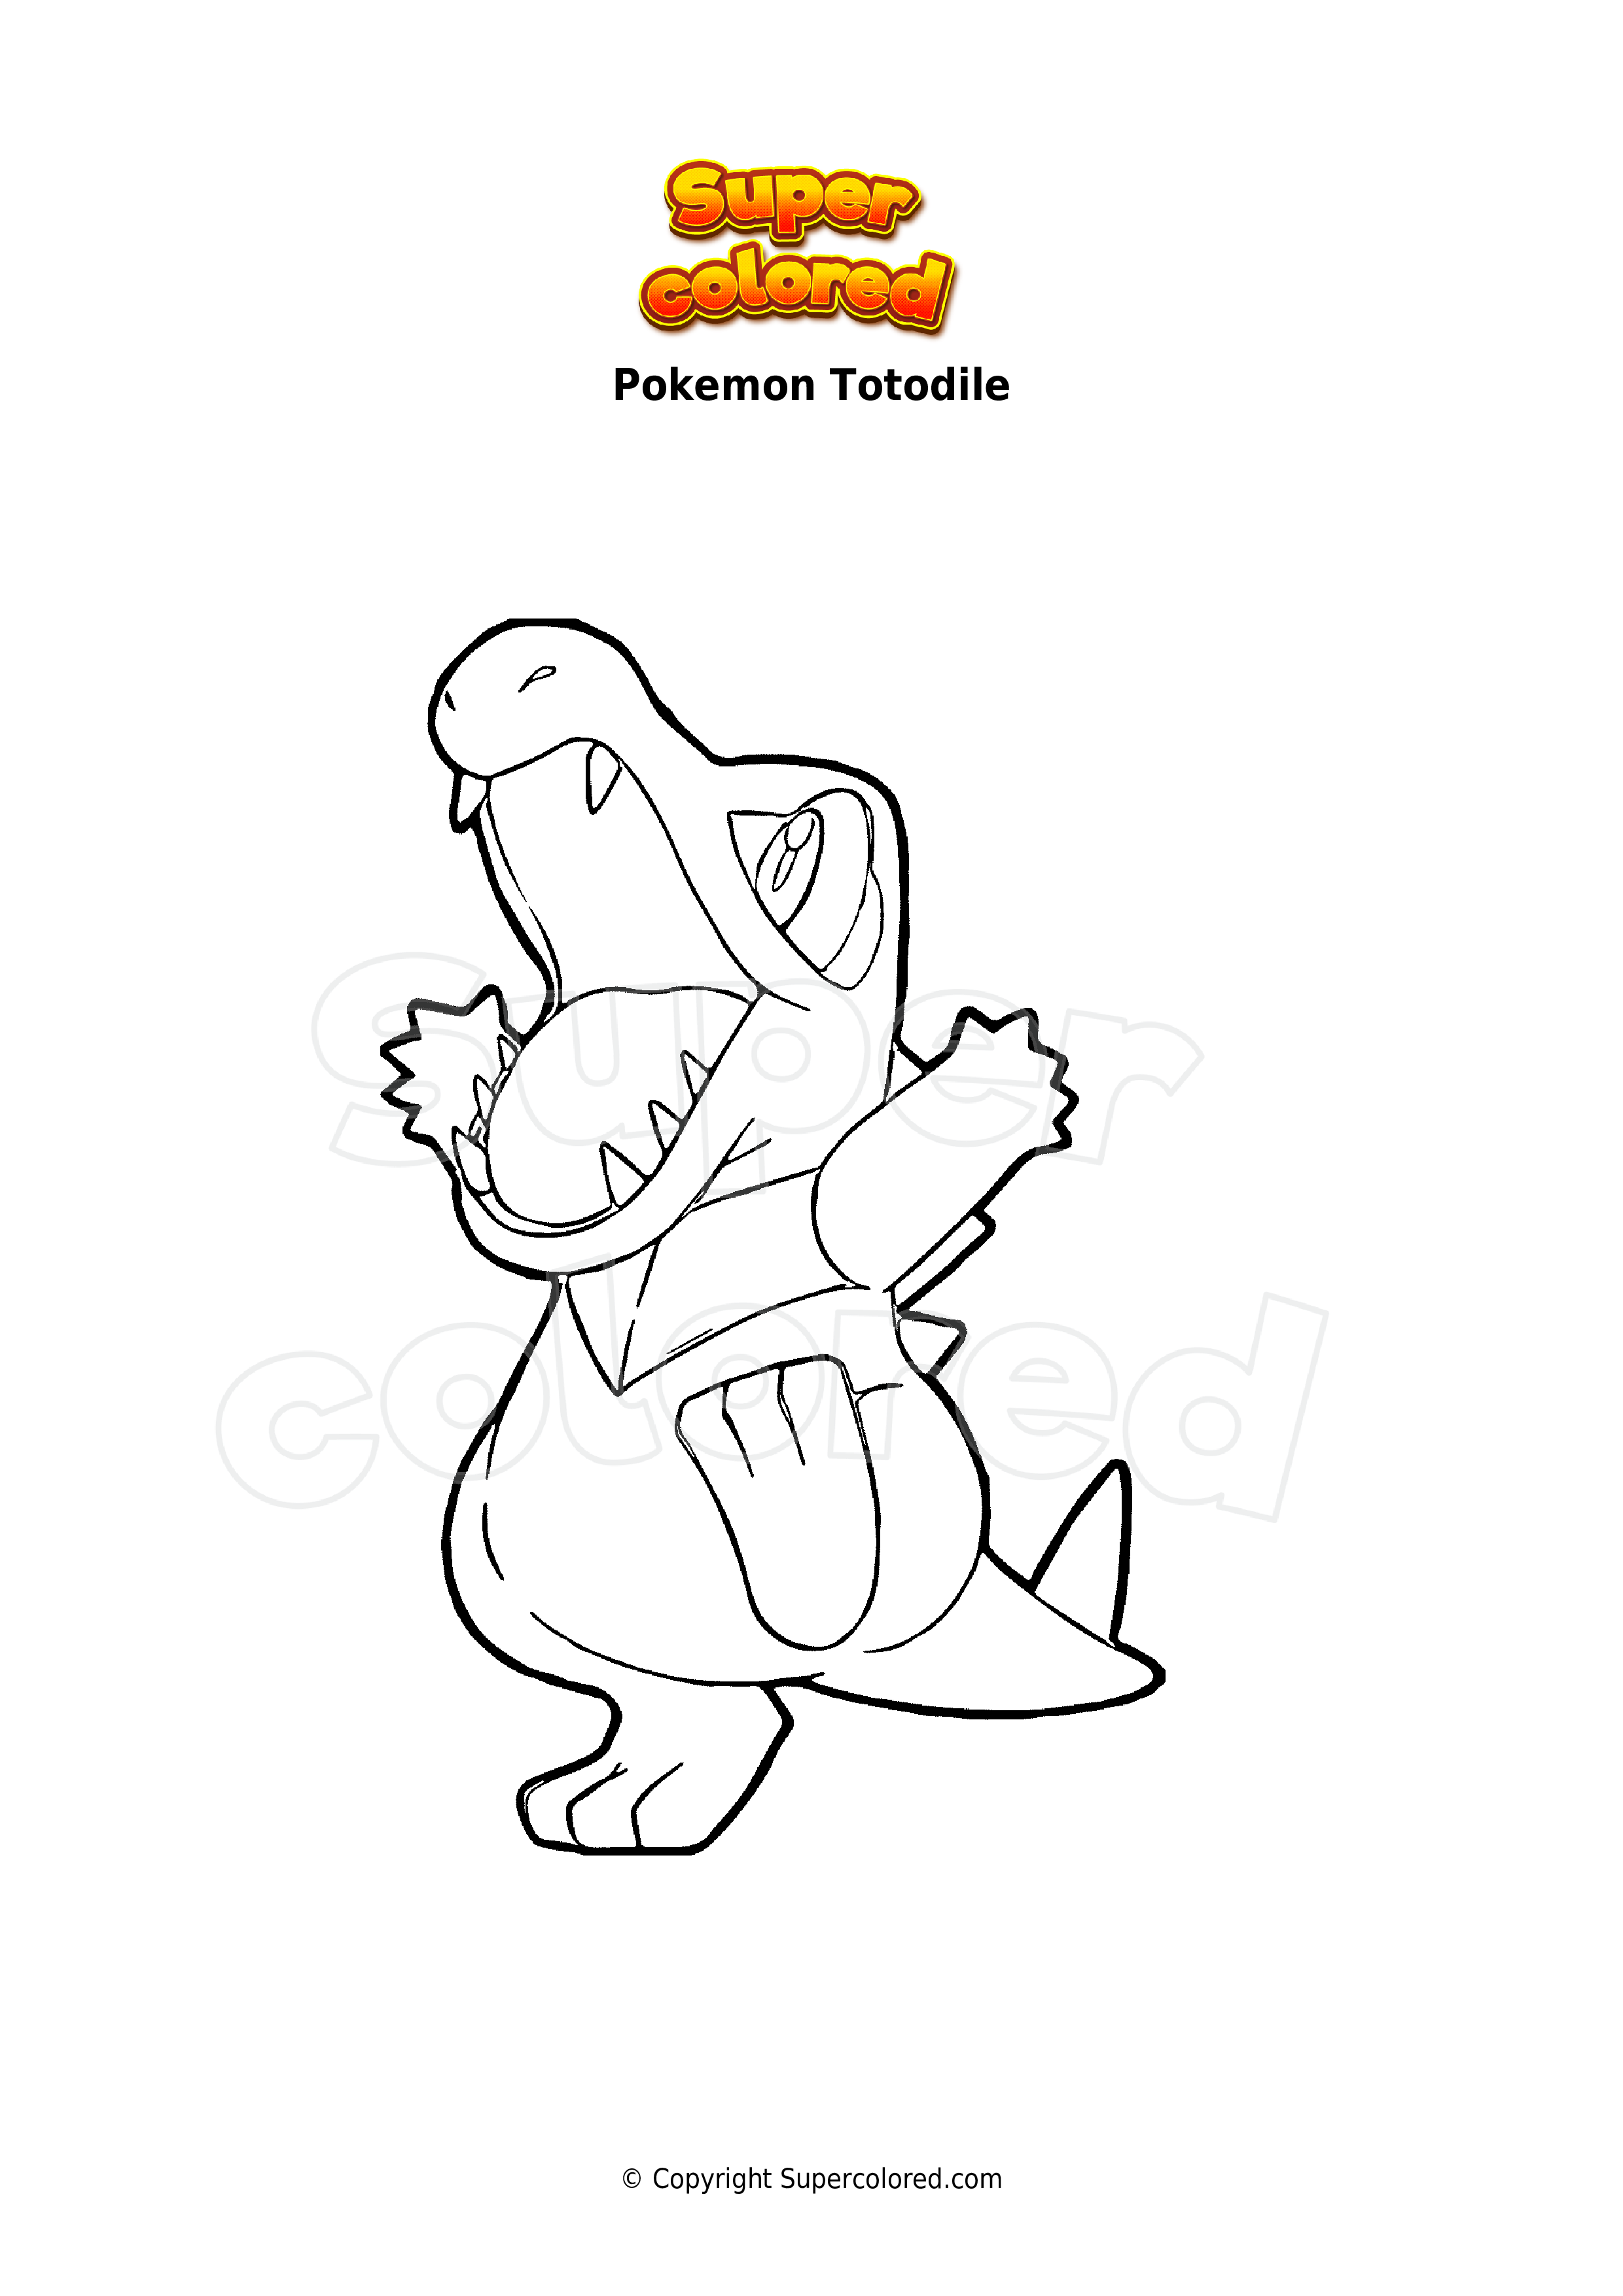 Coloring page pokemon totodile